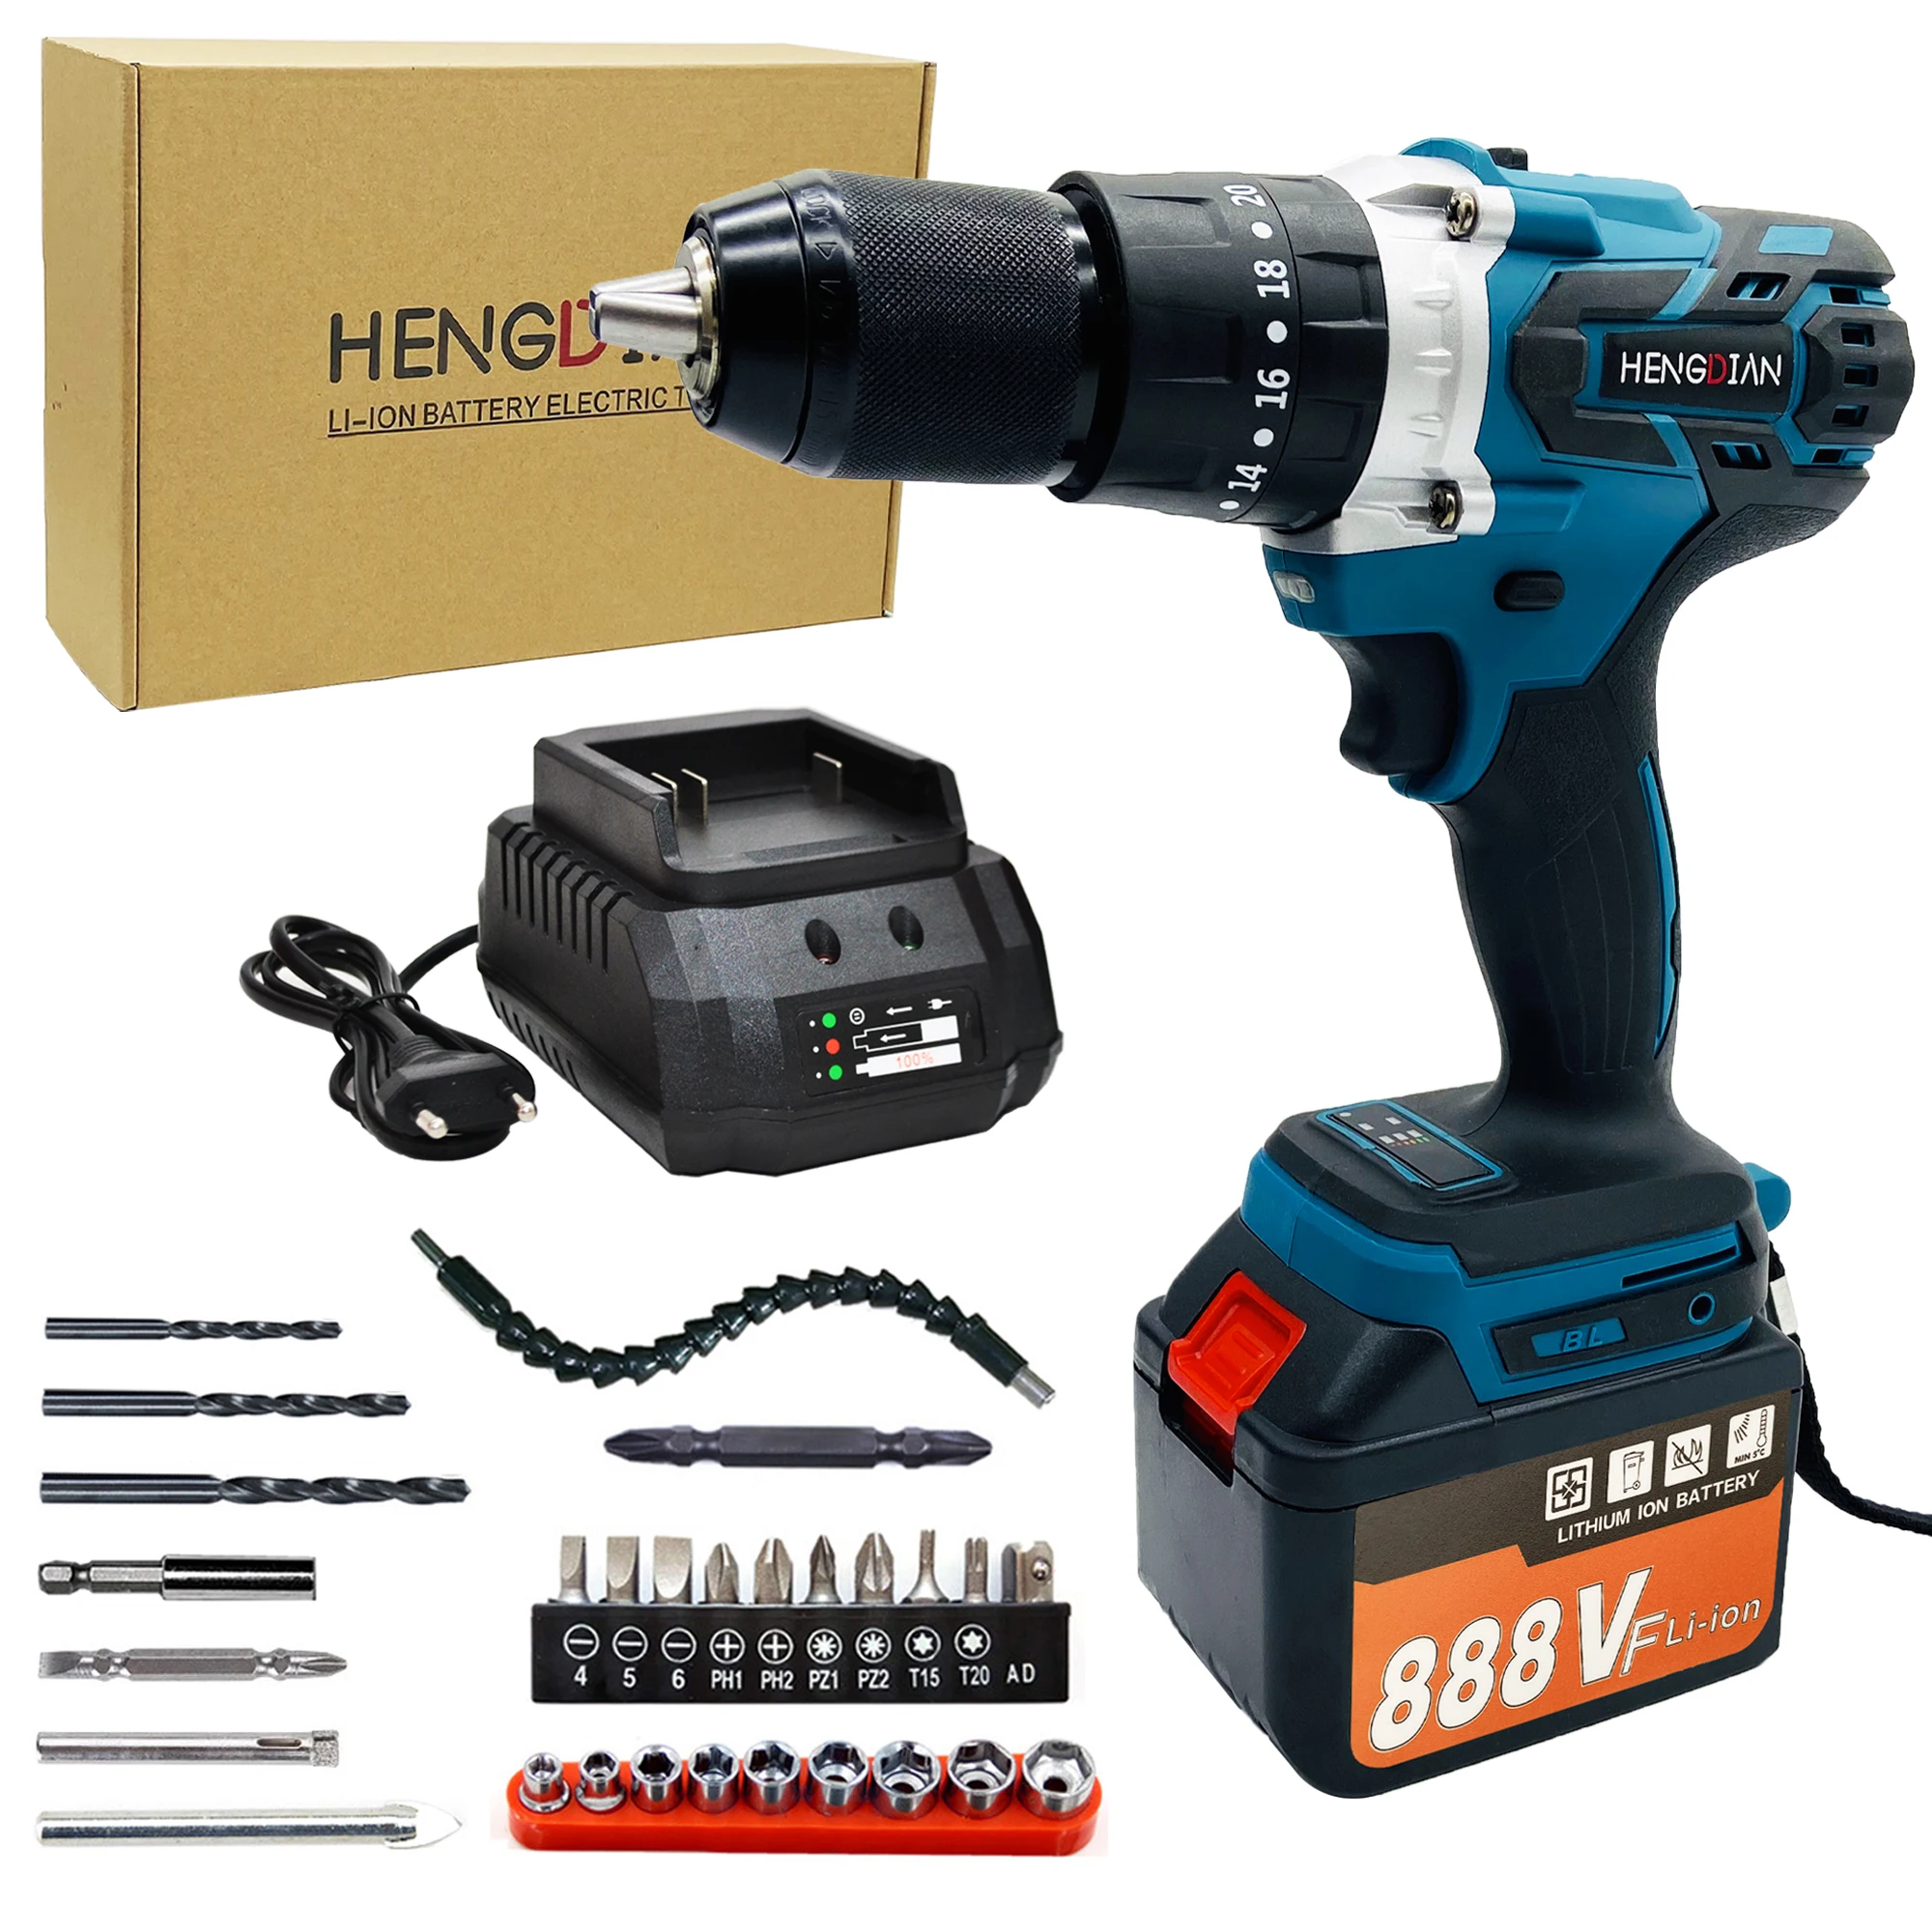 20V Brushless Battery Screwdriver Craft Drill Set Adjustable Torque Machine Impact Cordless Power Tools Electric Drill hot selling dw2107 machinery kit 4 0ah 5 0ah machine screwdriver impact cordless power dew 20v max power tools cordless drill